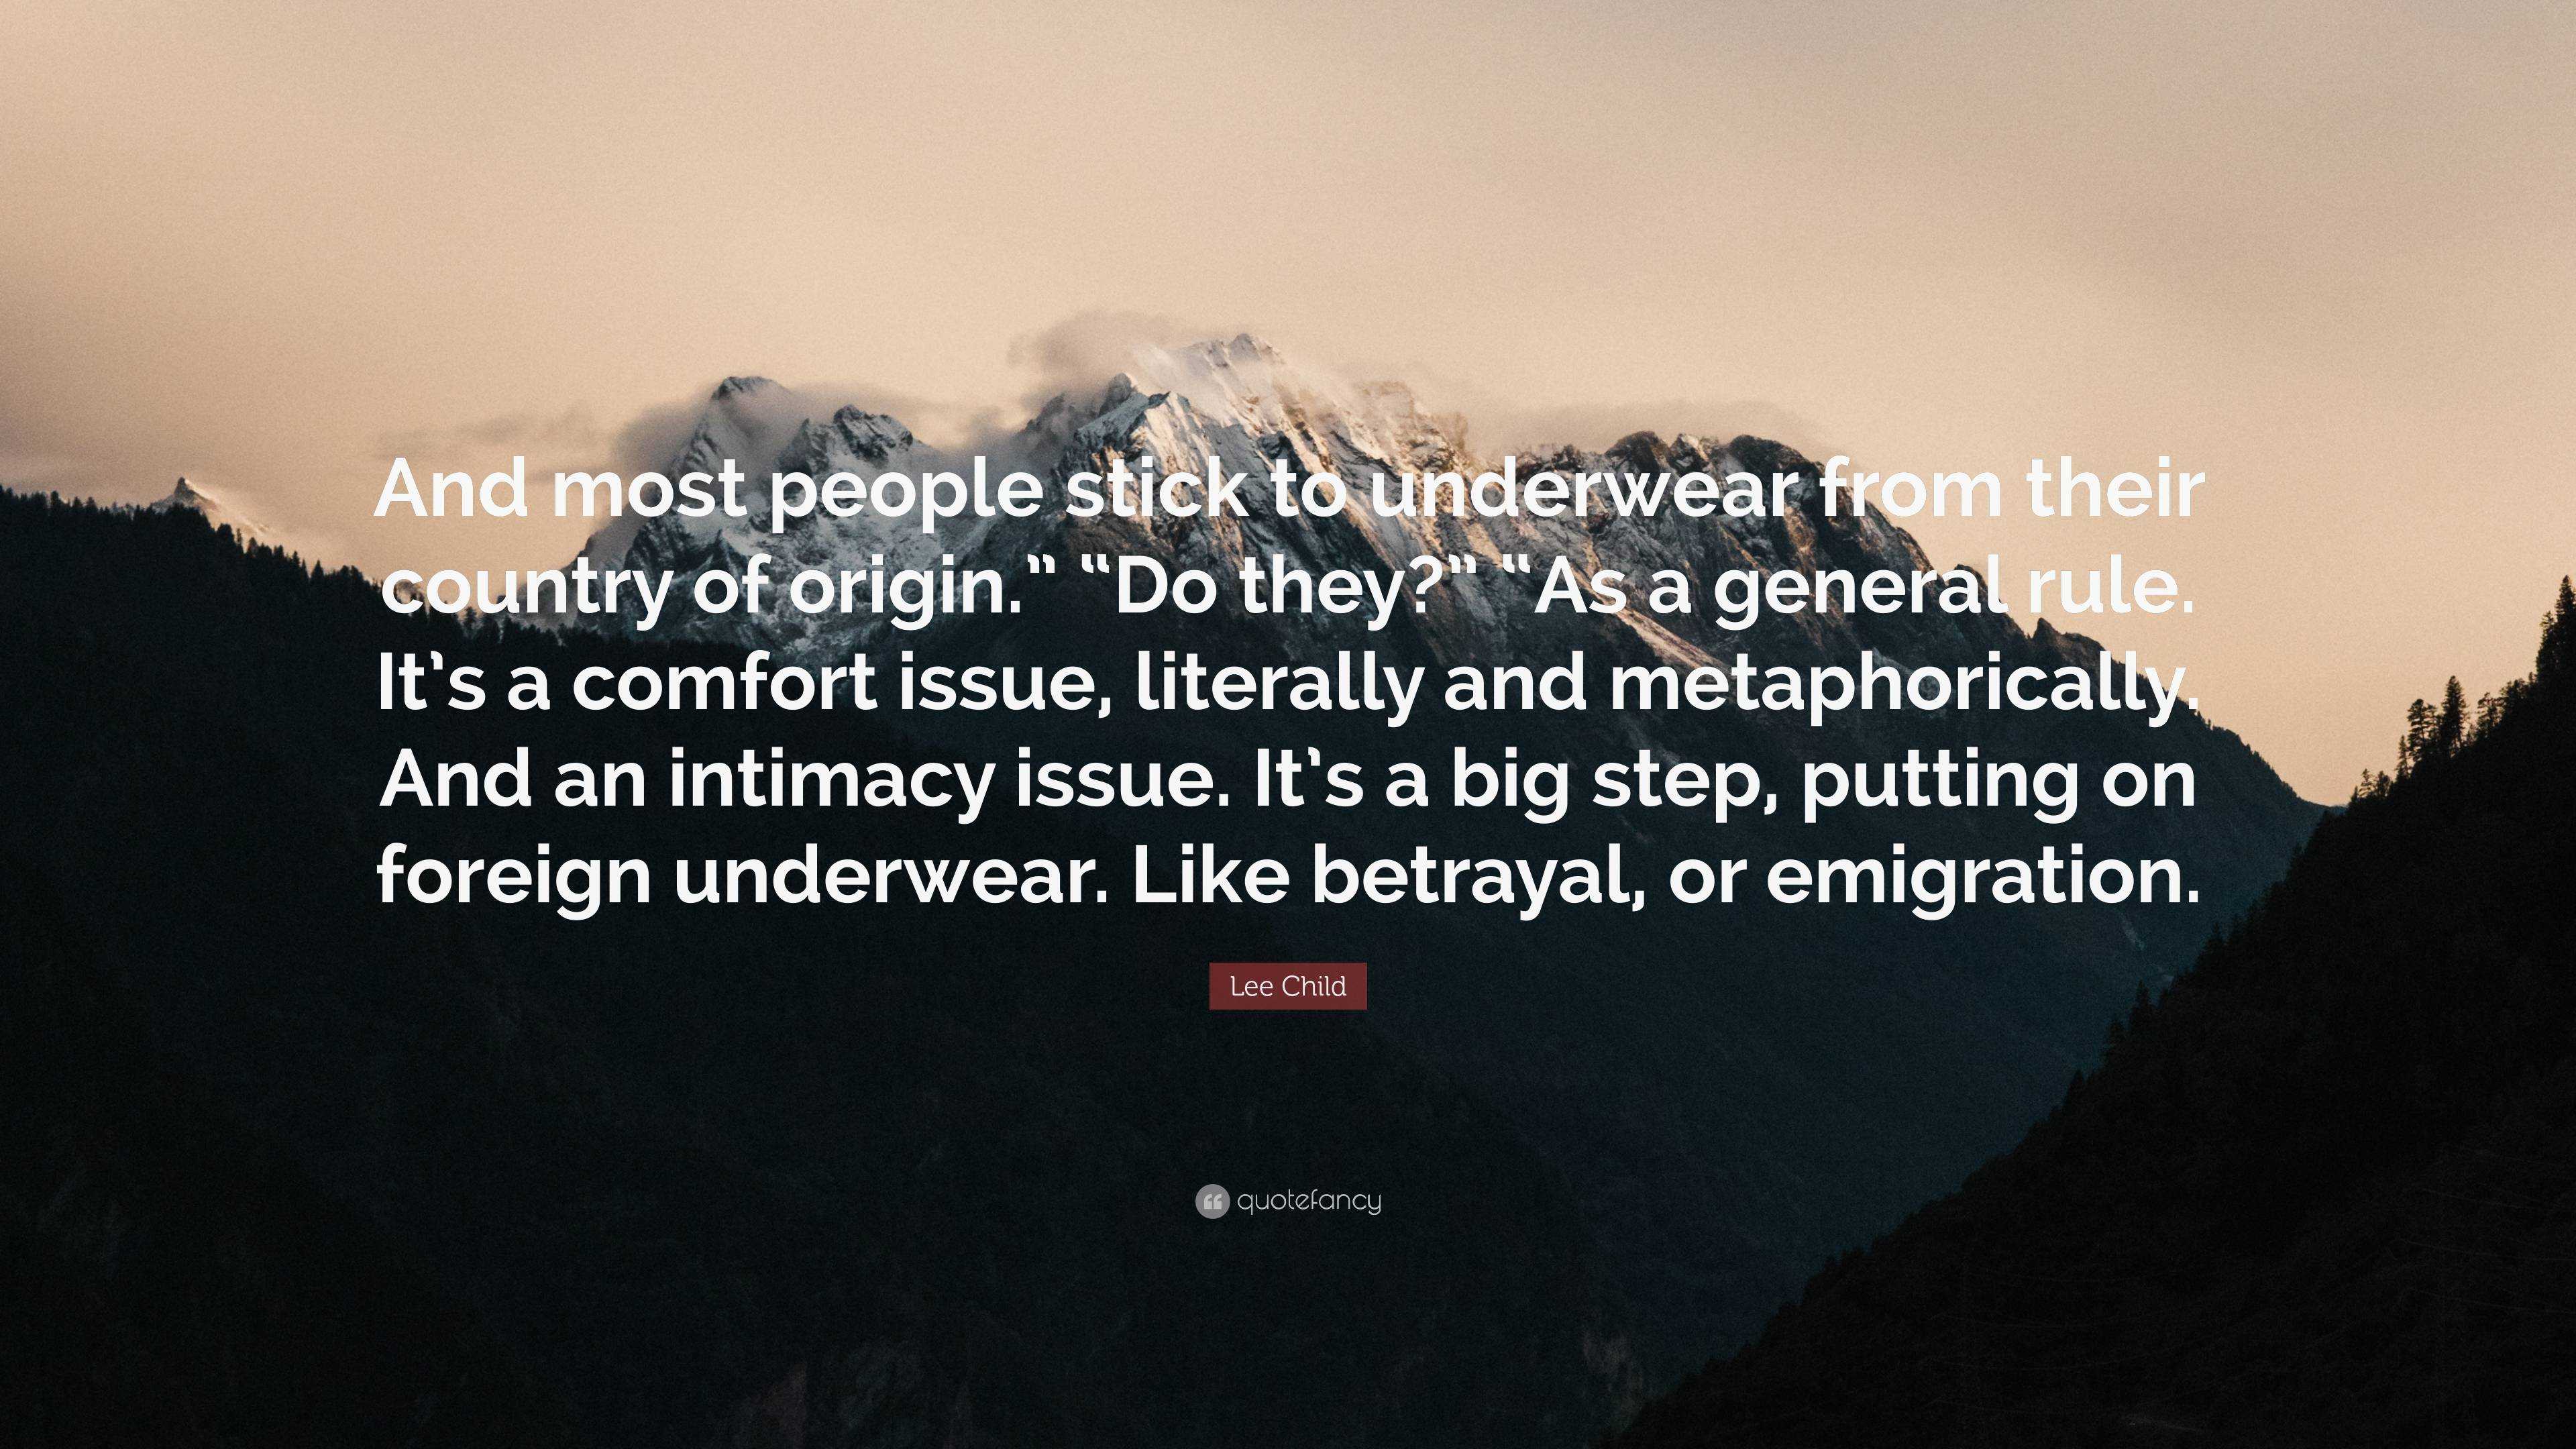 https://quotefancy.com/media/wallpaper/3840x2160/6634394-Lee-Child-Quote-And-most-people-stick-to-underwear-from-their.jpg